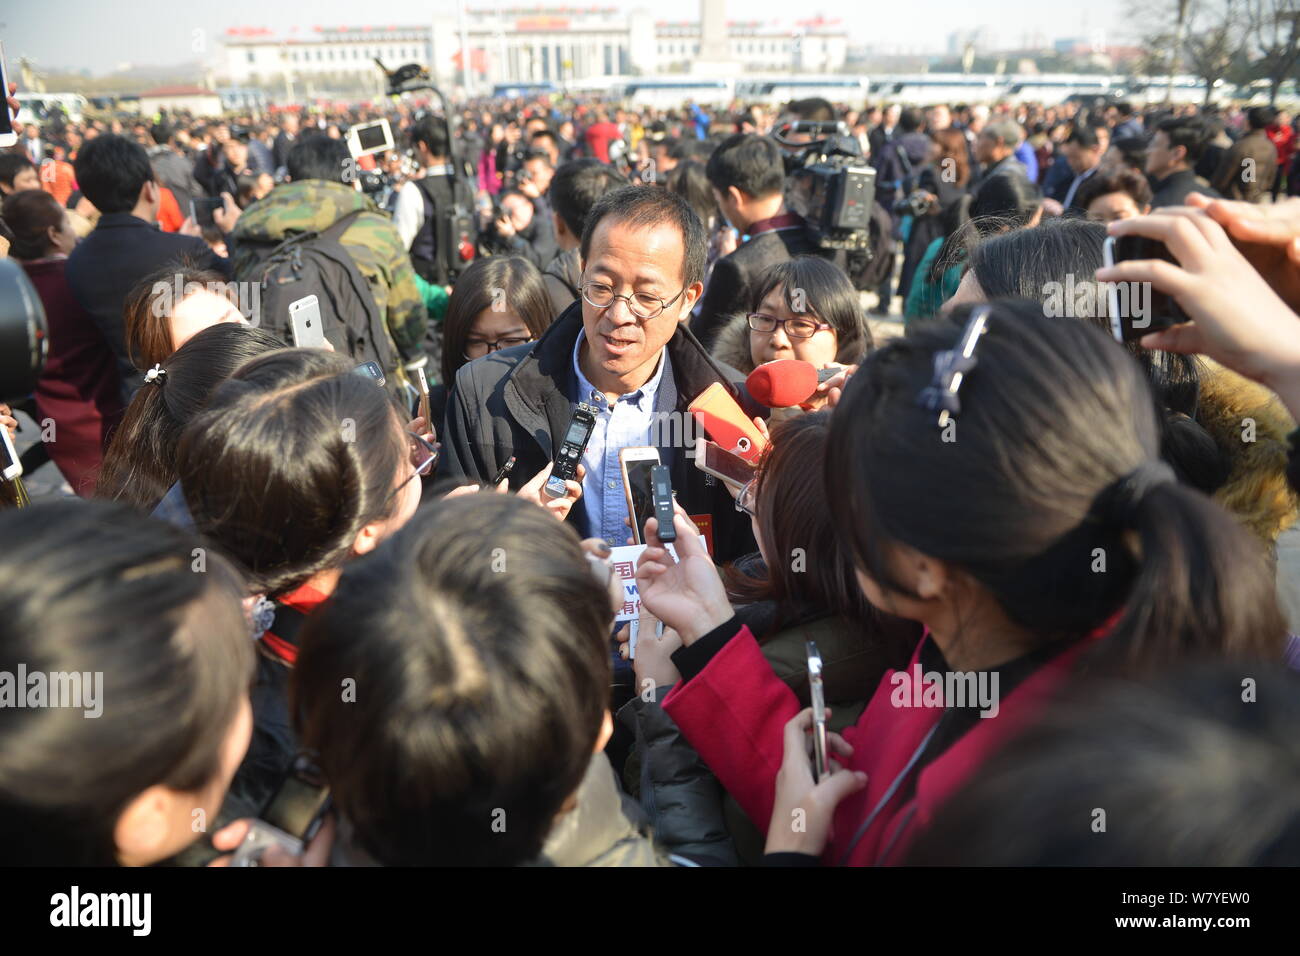 Michael Yu Minhong, center, founder and CEO of New Oriental Education & Technology Group, is surrounded by reporters as he arrives at the Great Hall o Stock Photo